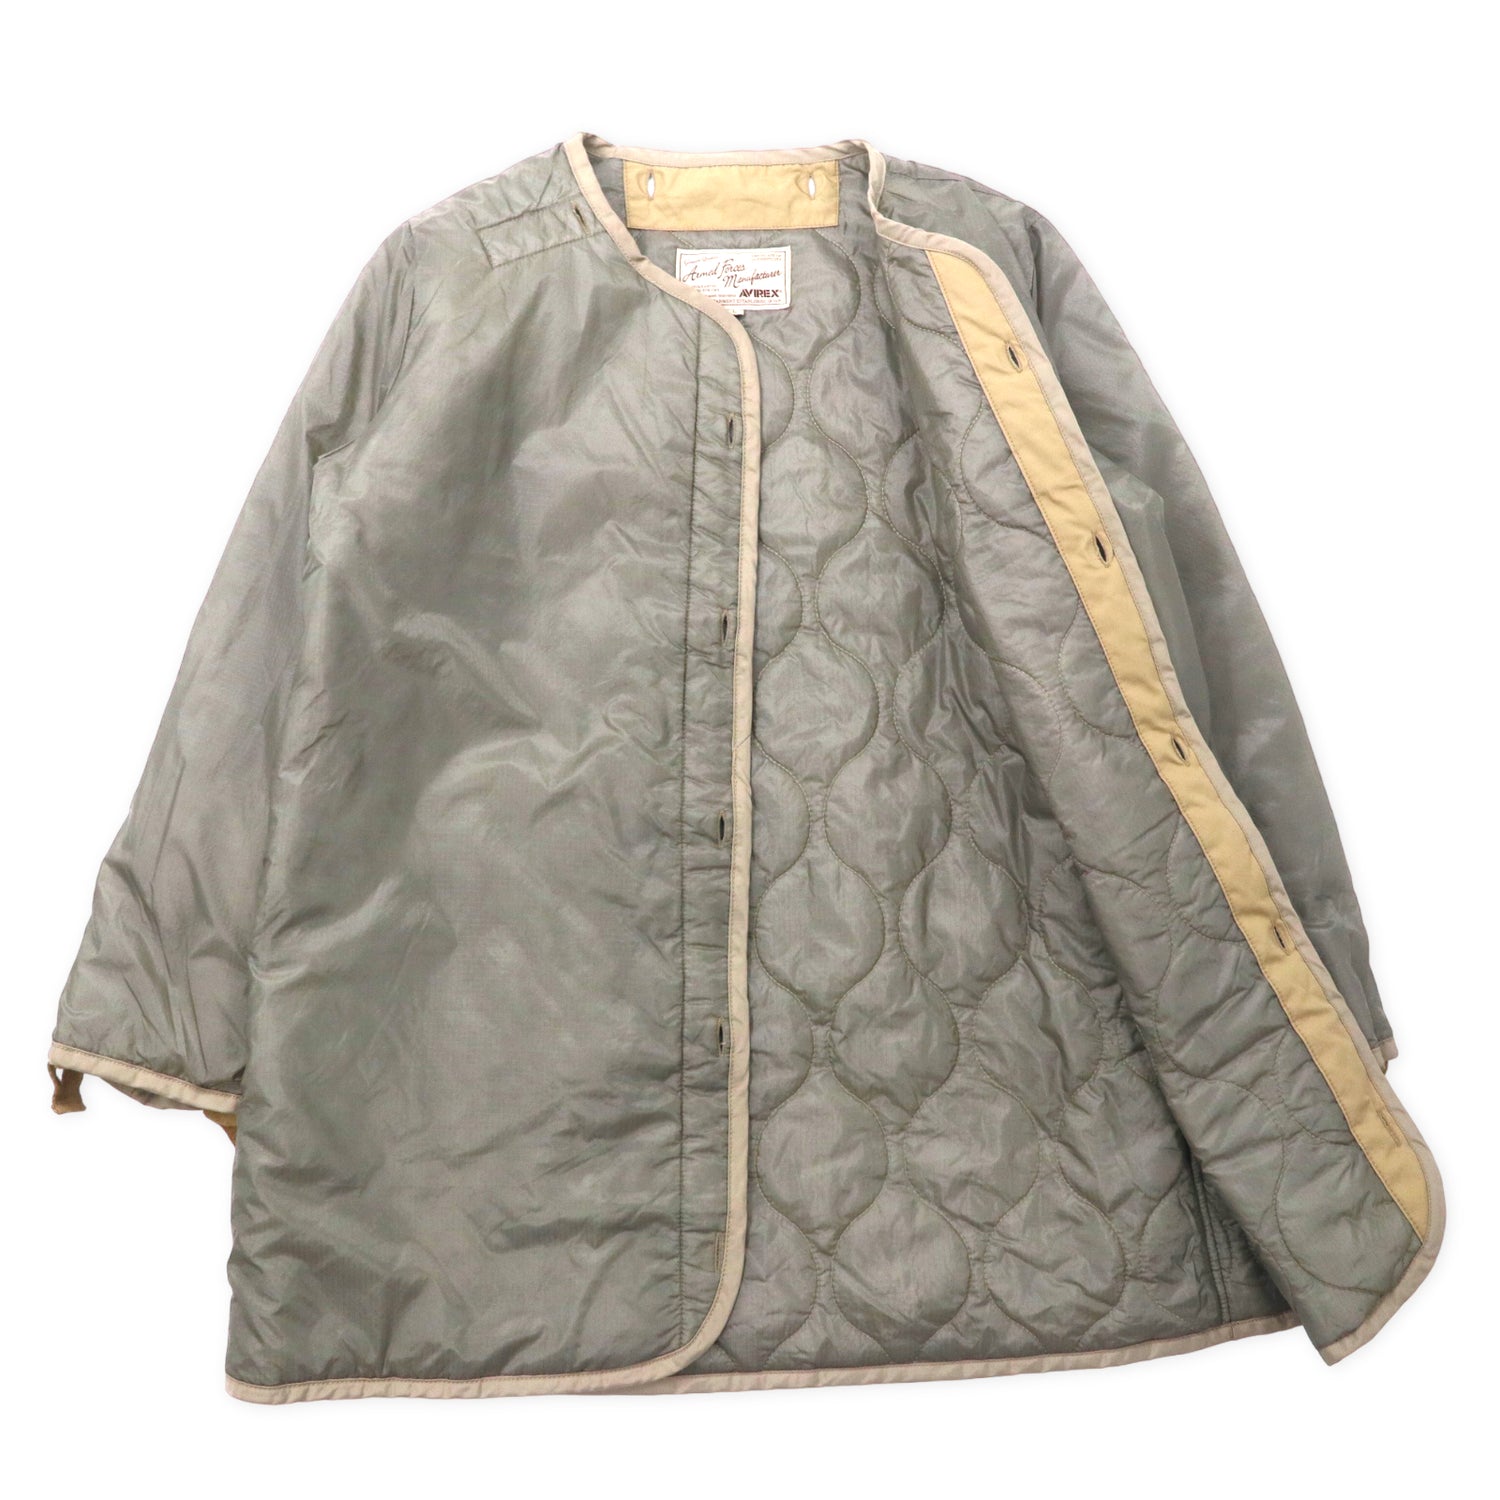 AVIREX M-51 MOD PARKA L Beige Cotton Military Quilted Liner 